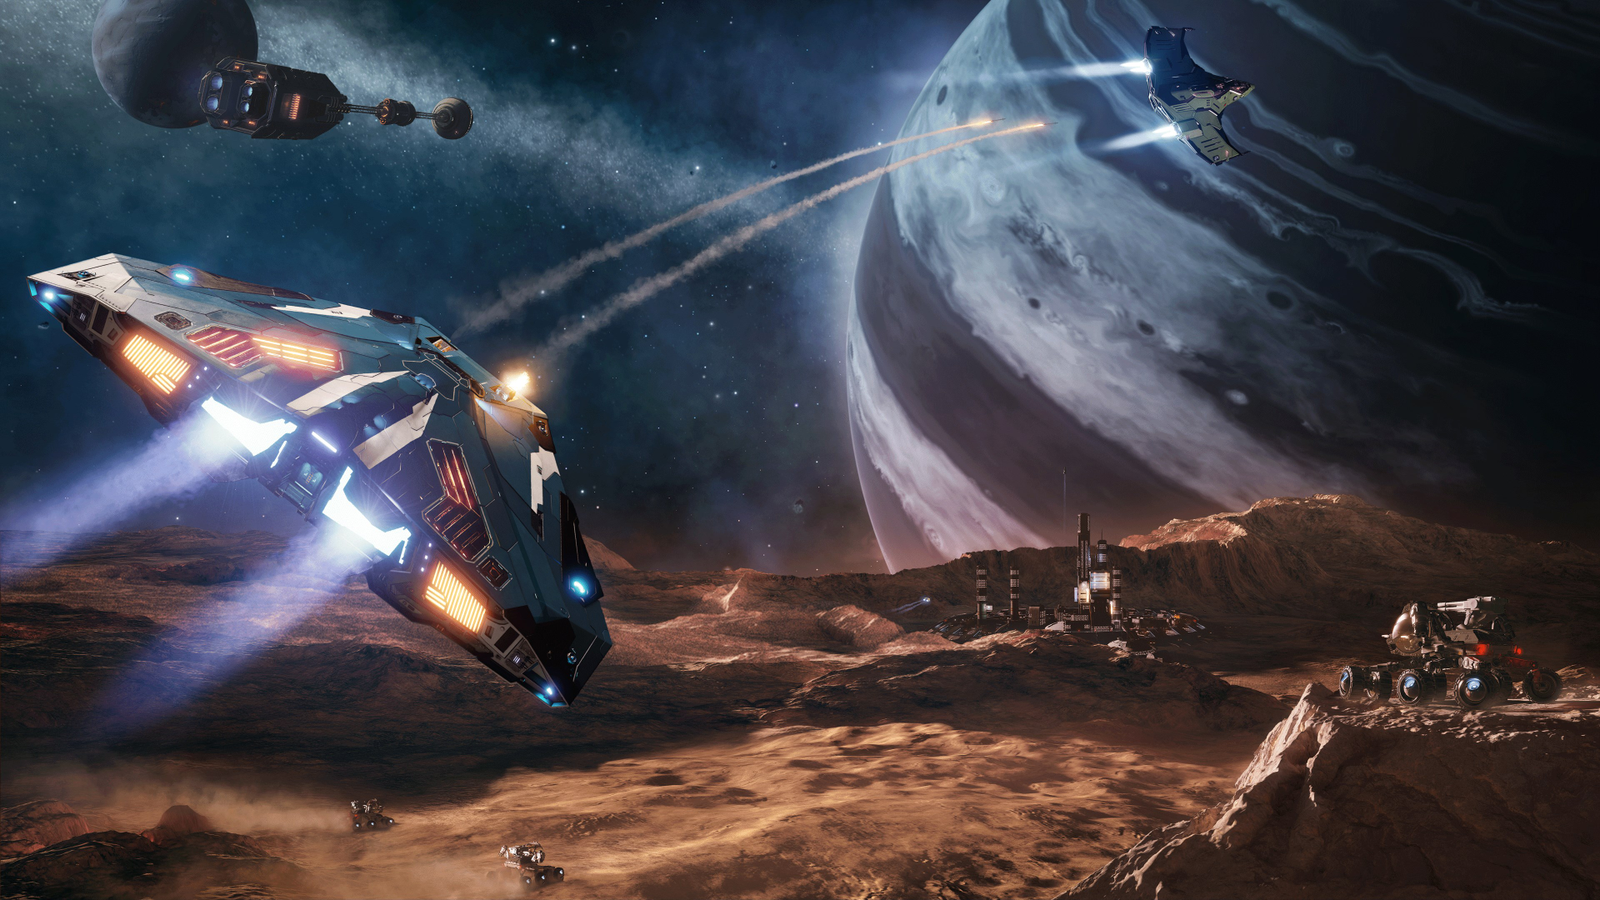 Elite Dangerous cancels Odyssey expansion and all future content